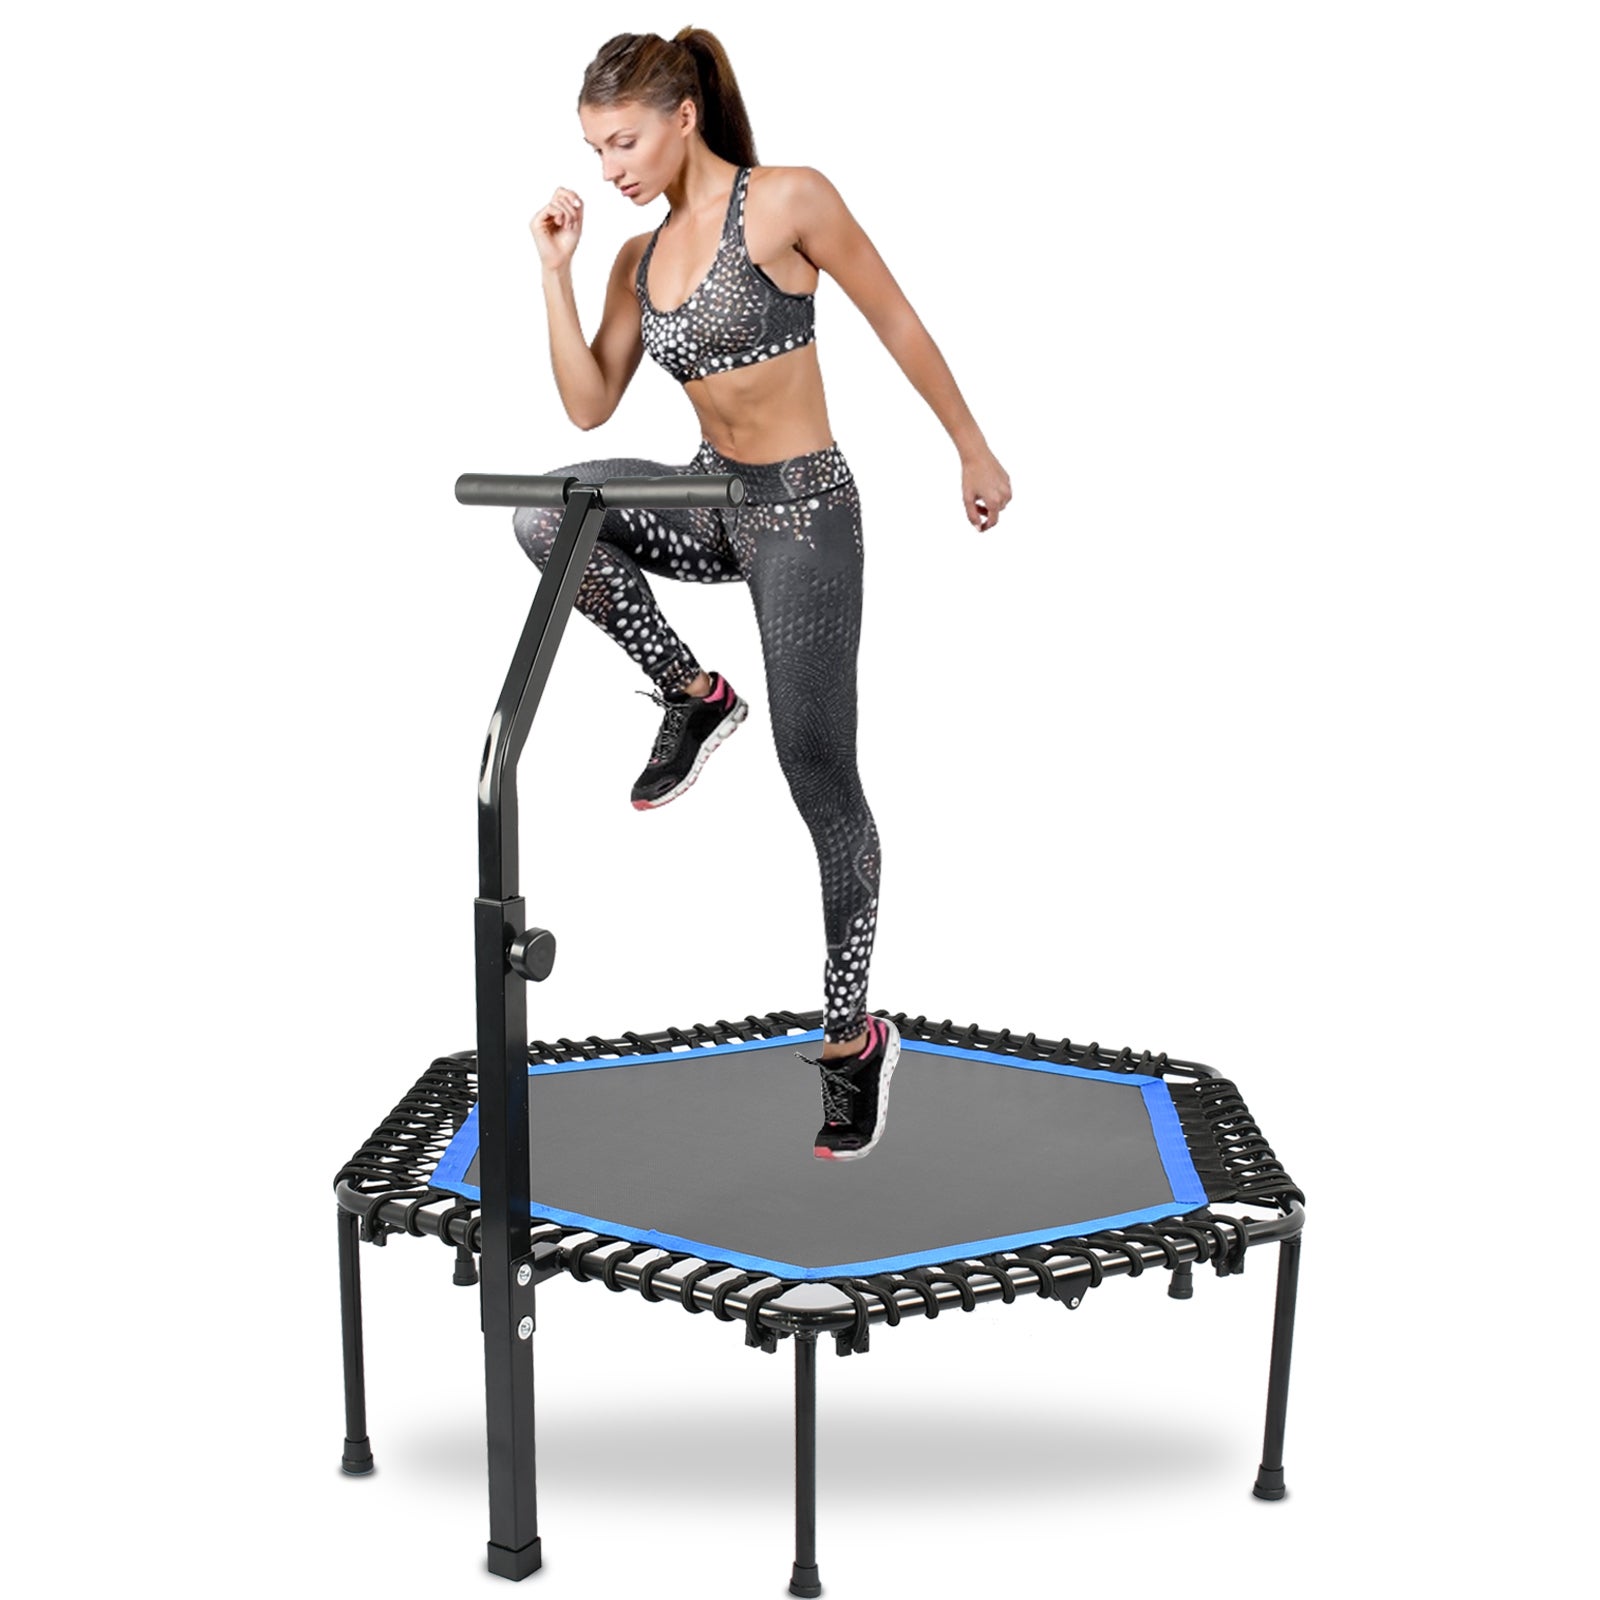 ADVWIN 50-inch Mini Trampoline, Fitness Trampoline with Adjustable Foam Handle for Adults Exercising, No-spring Trampoline Rebounder for Home and Gym Use, Blue & Black